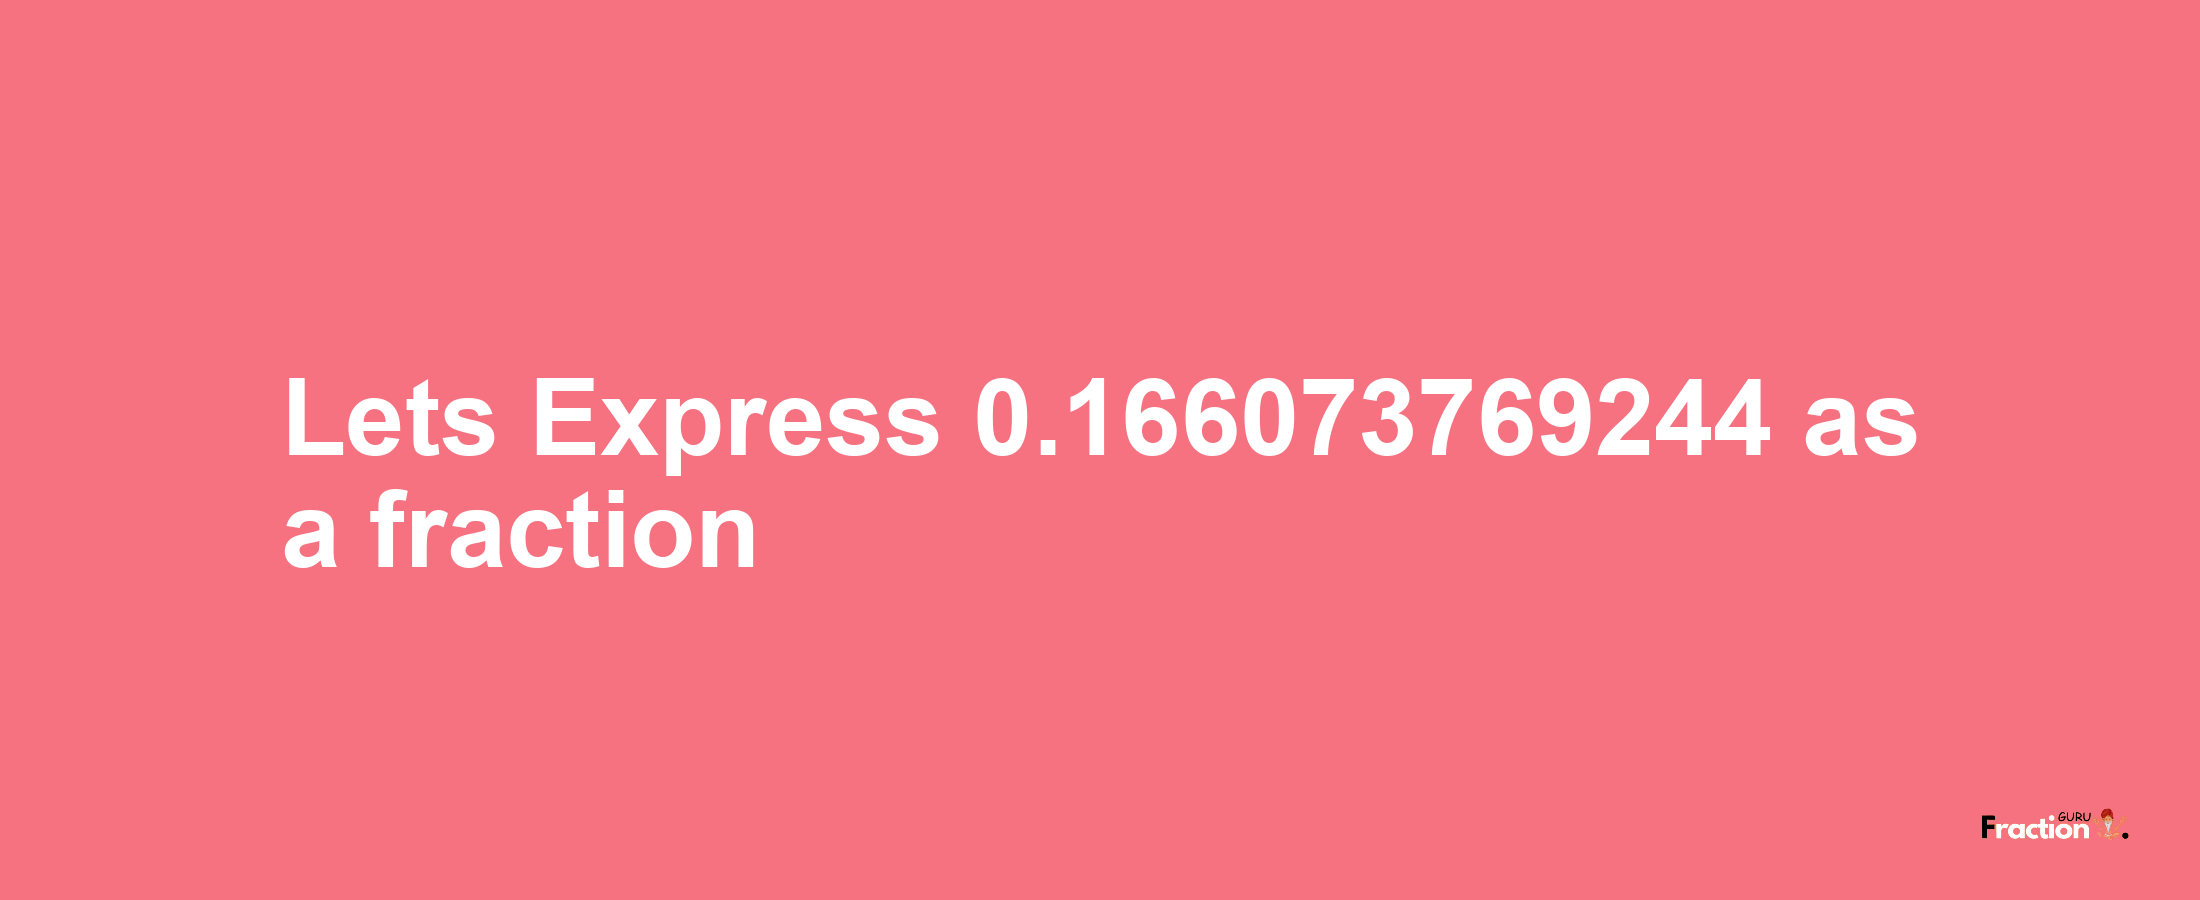 Lets Express 0.166073769244 as afraction